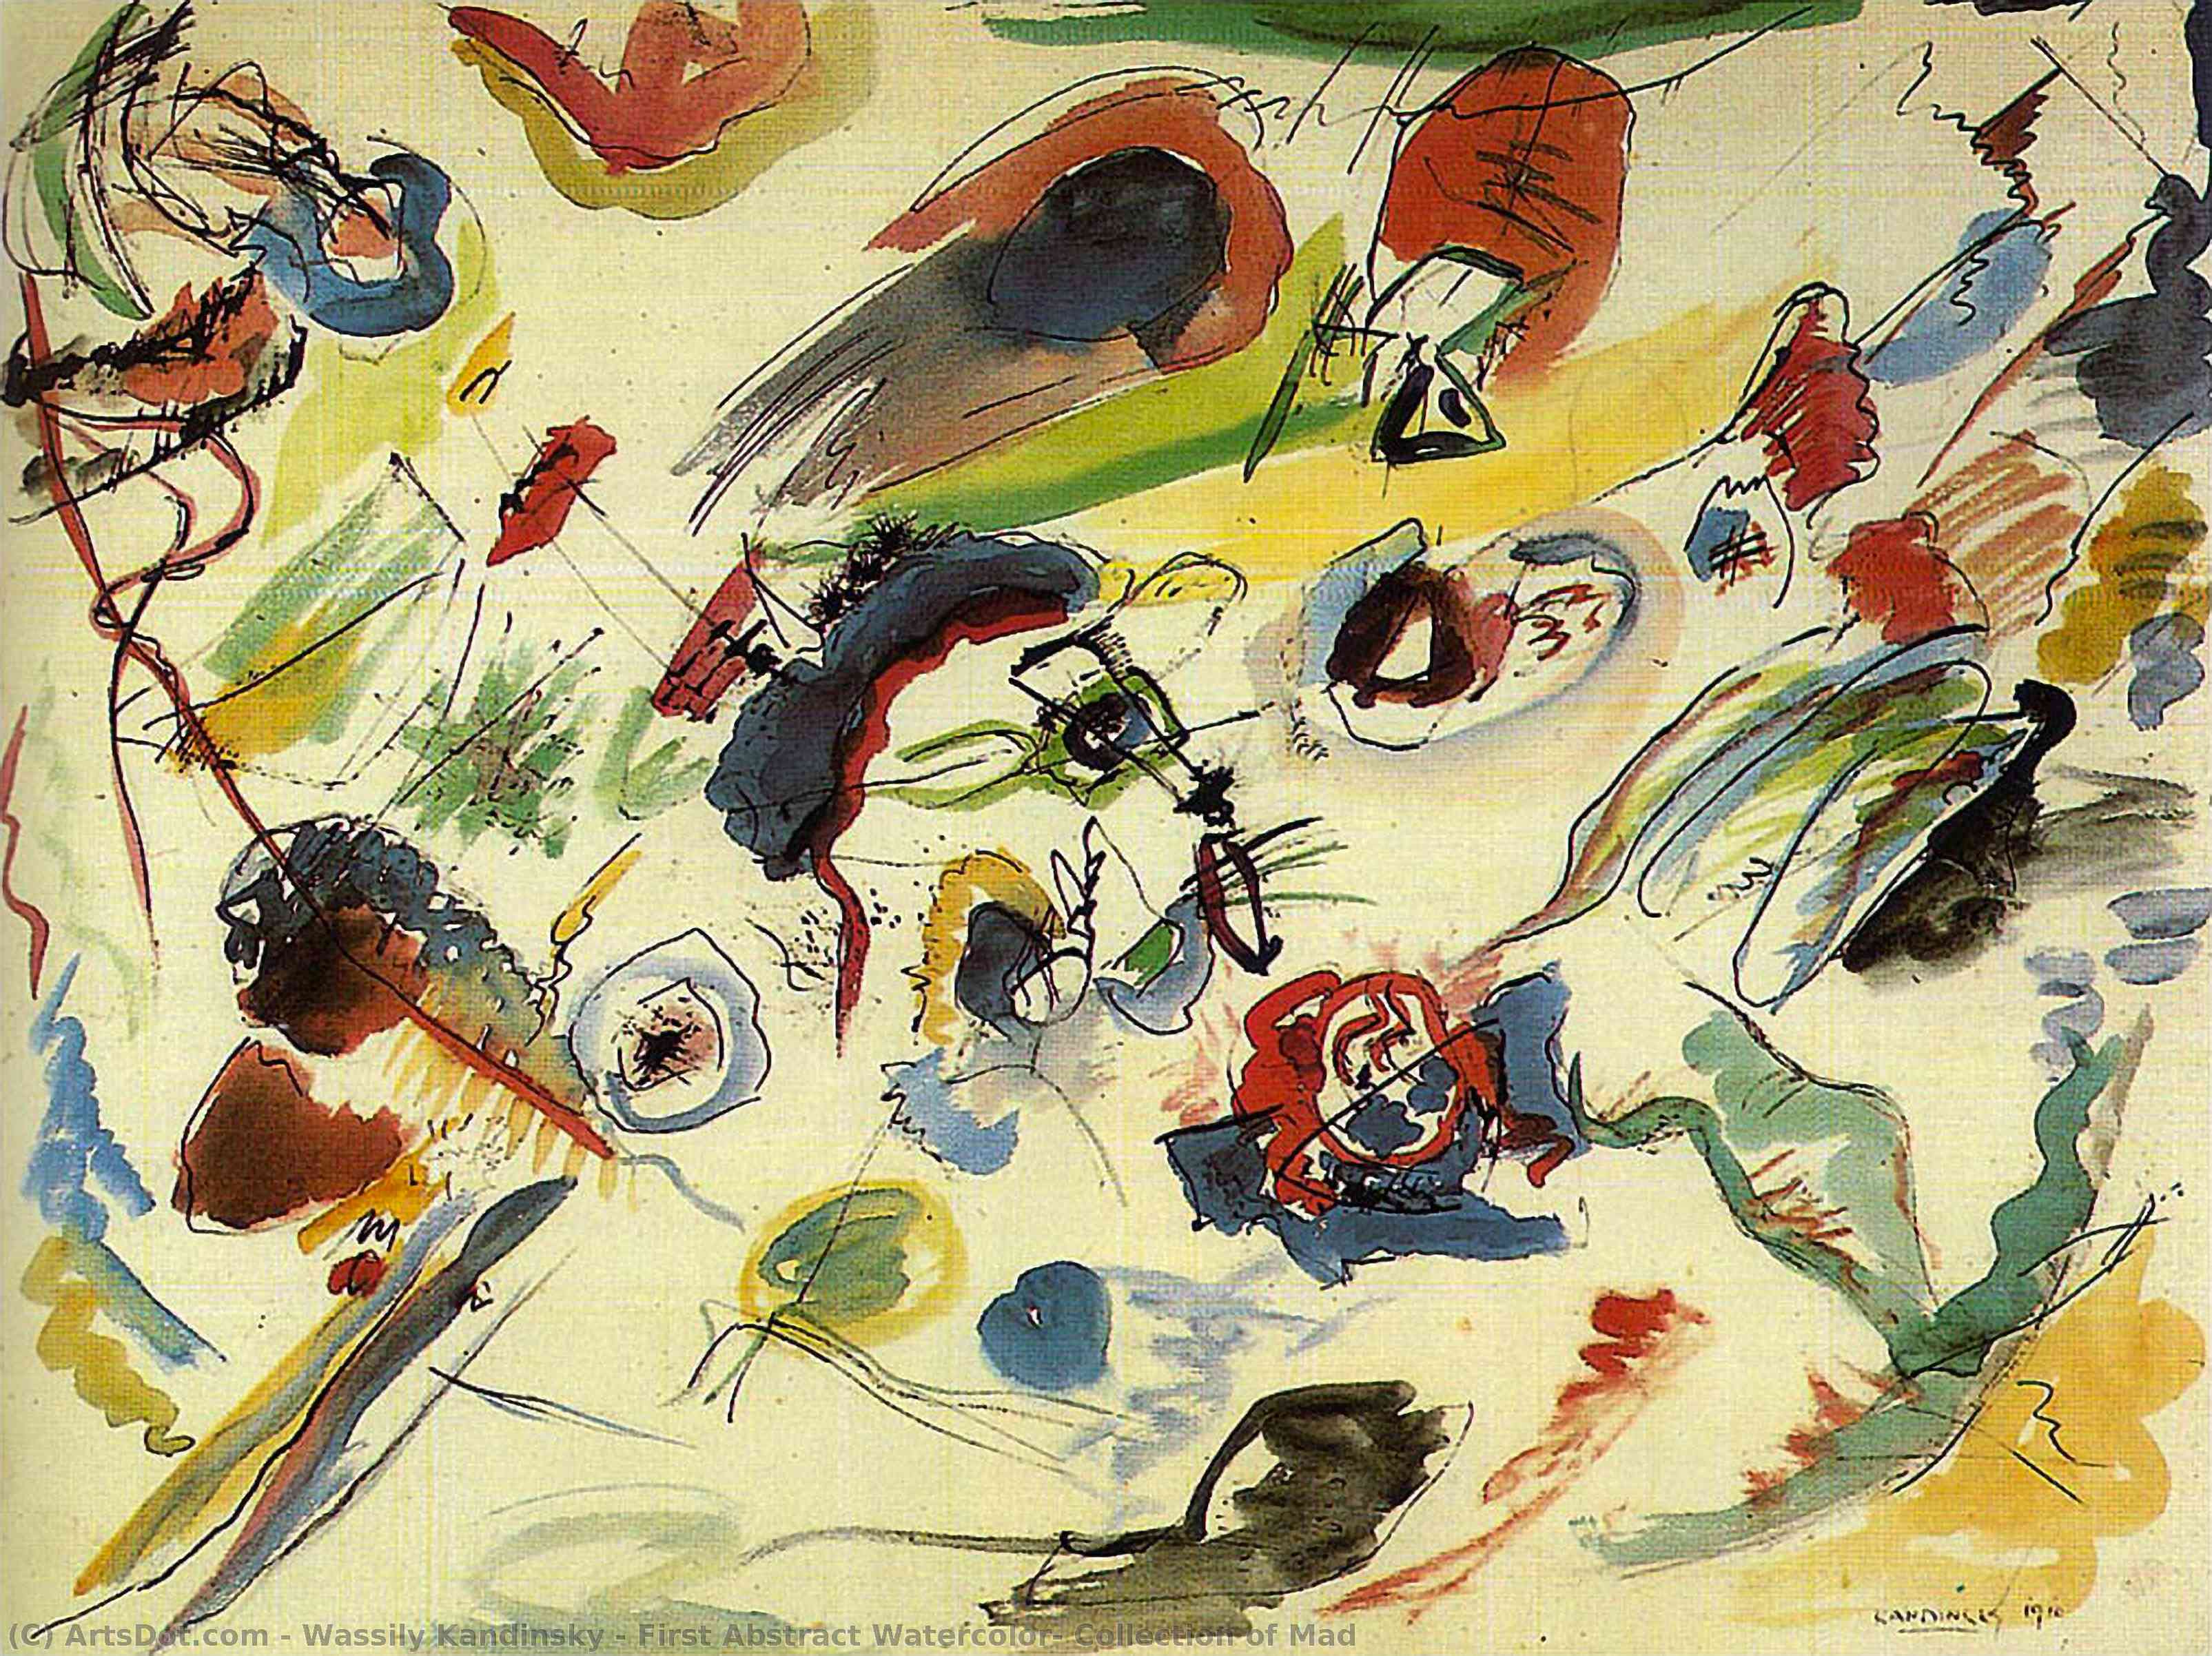 Wikioo.org - Encyklopedia Sztuk Pięknych - Malarstwo, Grafika Wassily Kandinsky - First Abstract Watercolor, Collection of Mad